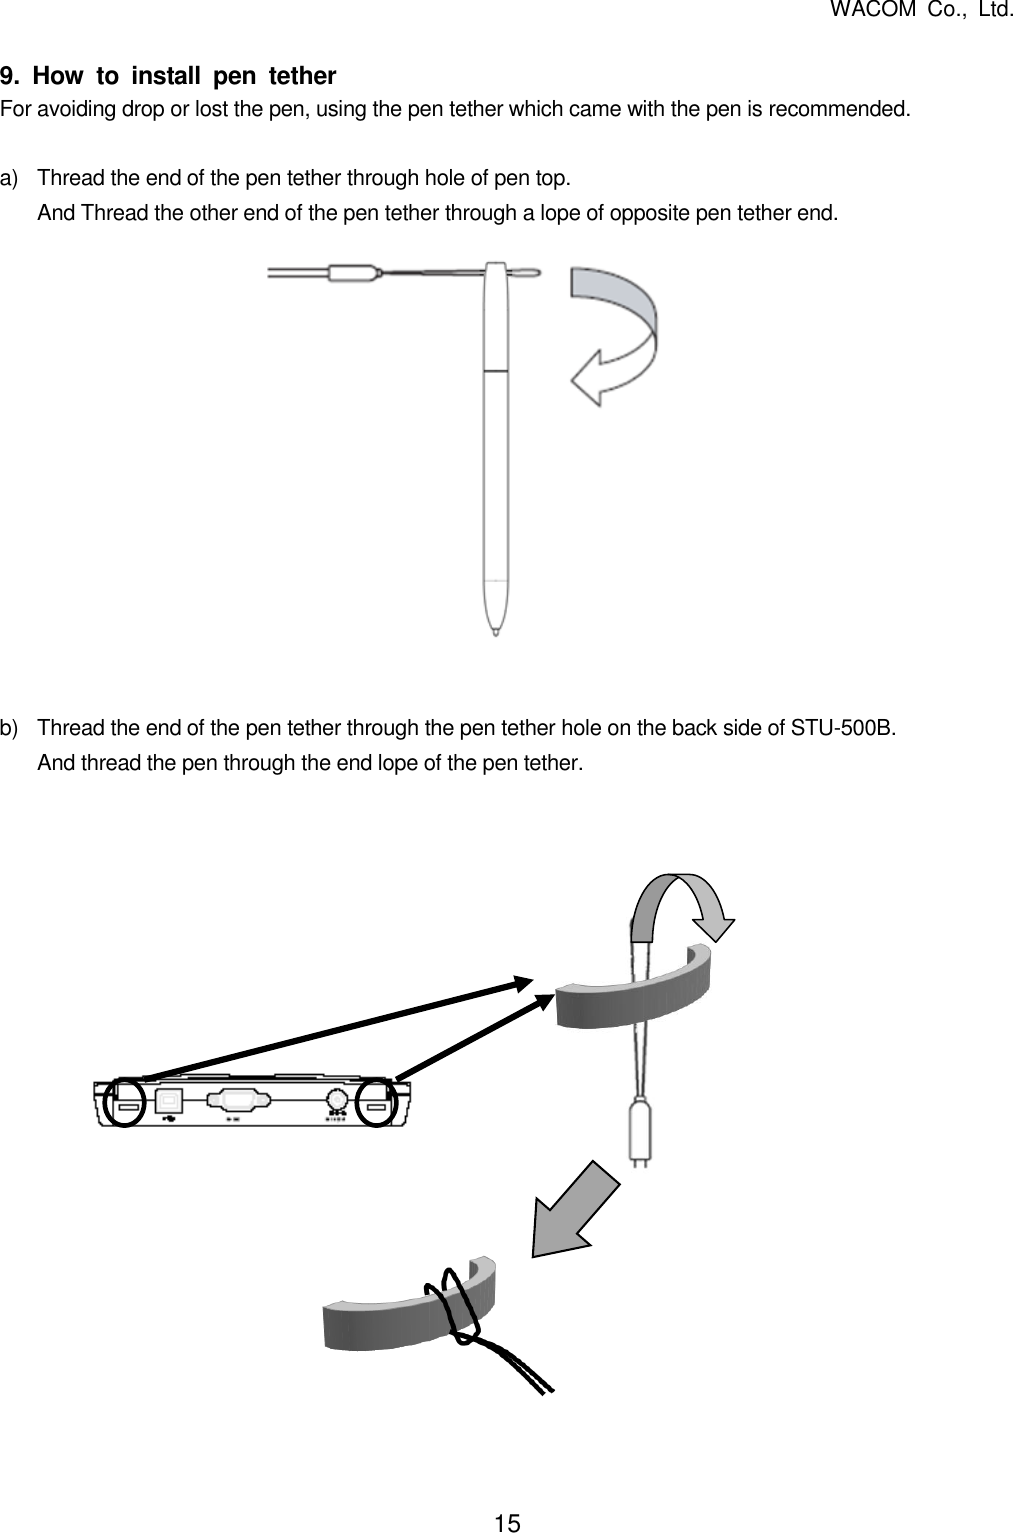   WACOM  Co.,  Ltd. 15   9.  How  to  install  pen  tether For avoiding drop or lost the pen, using the pen tether which came with the pen is recommended.  a) Thread the end of the pen tether through hole of pen top. And Thread the other end of the pen tether through a lope of opposite pen tether end.               b)  Thread the end of the pen tether through the pen tether hole on the back side of STU-500B. And thread the pen through the end lope of the pen tether.                  